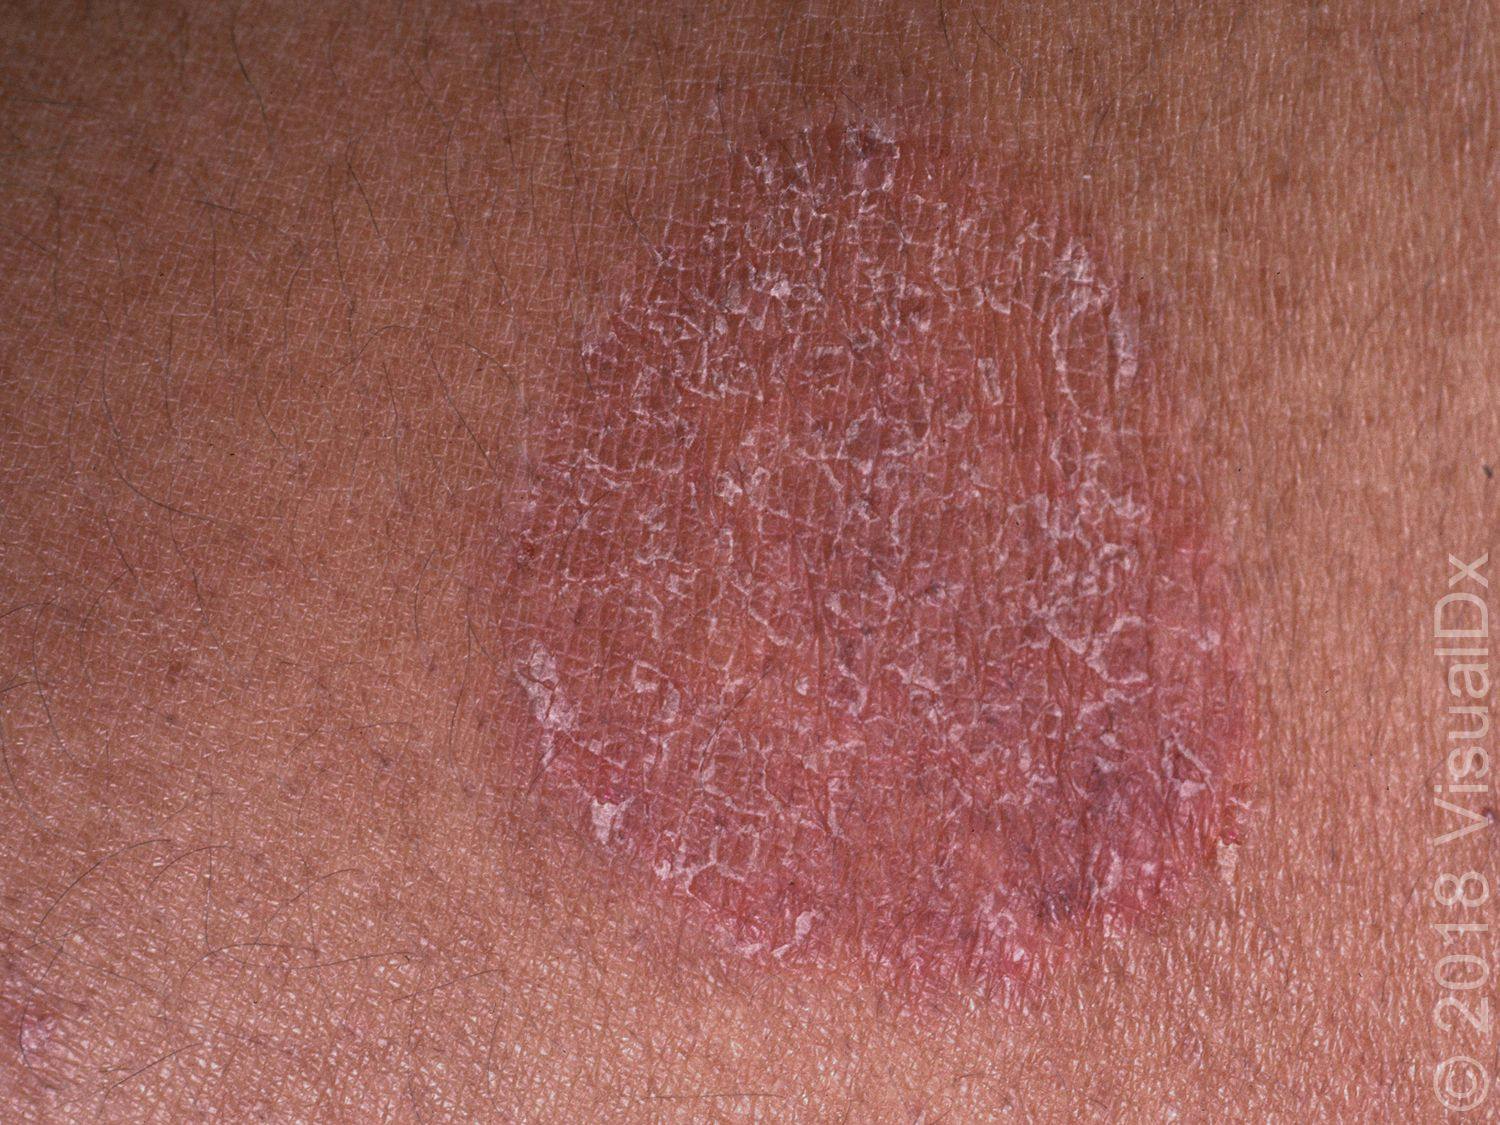 Image IQ: Widespread brown macules on the trunk